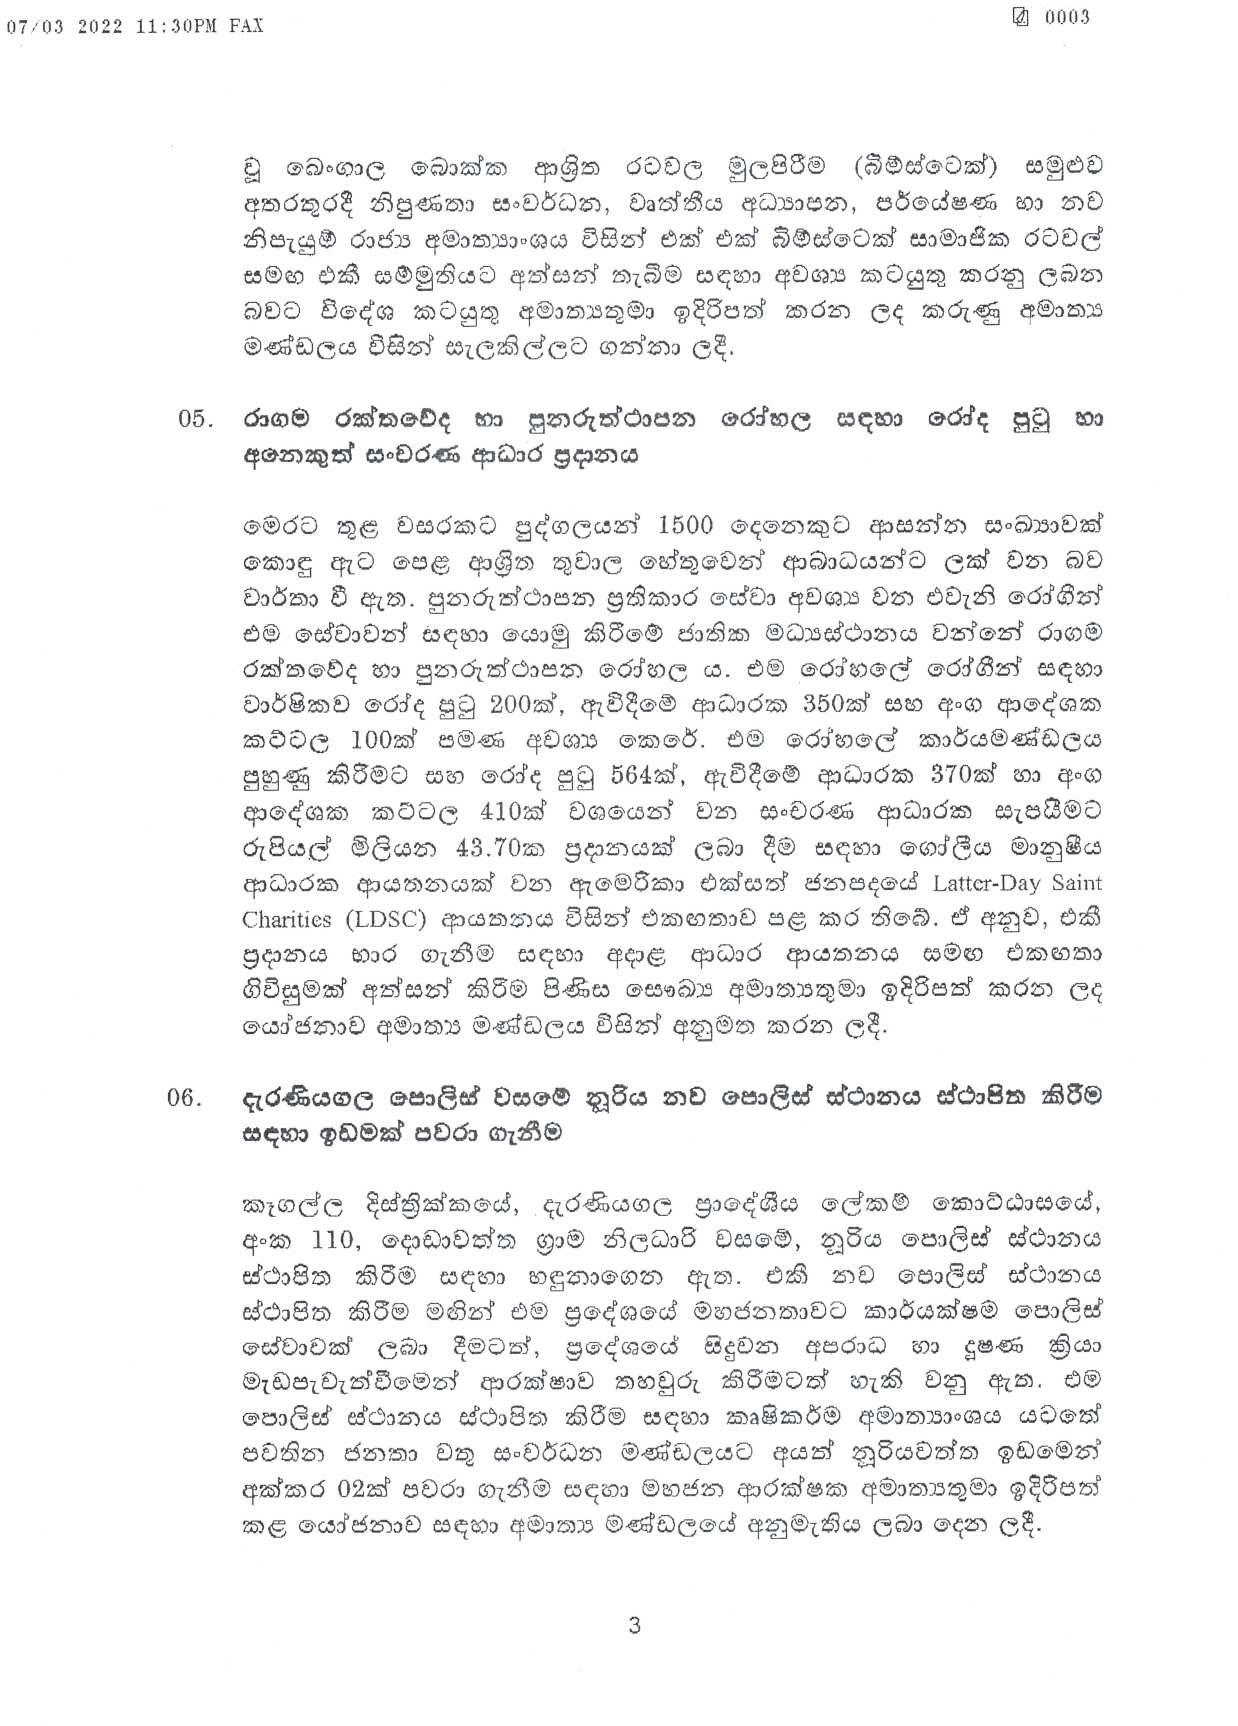 Cabinet Decision on 07.03.2022 page 003